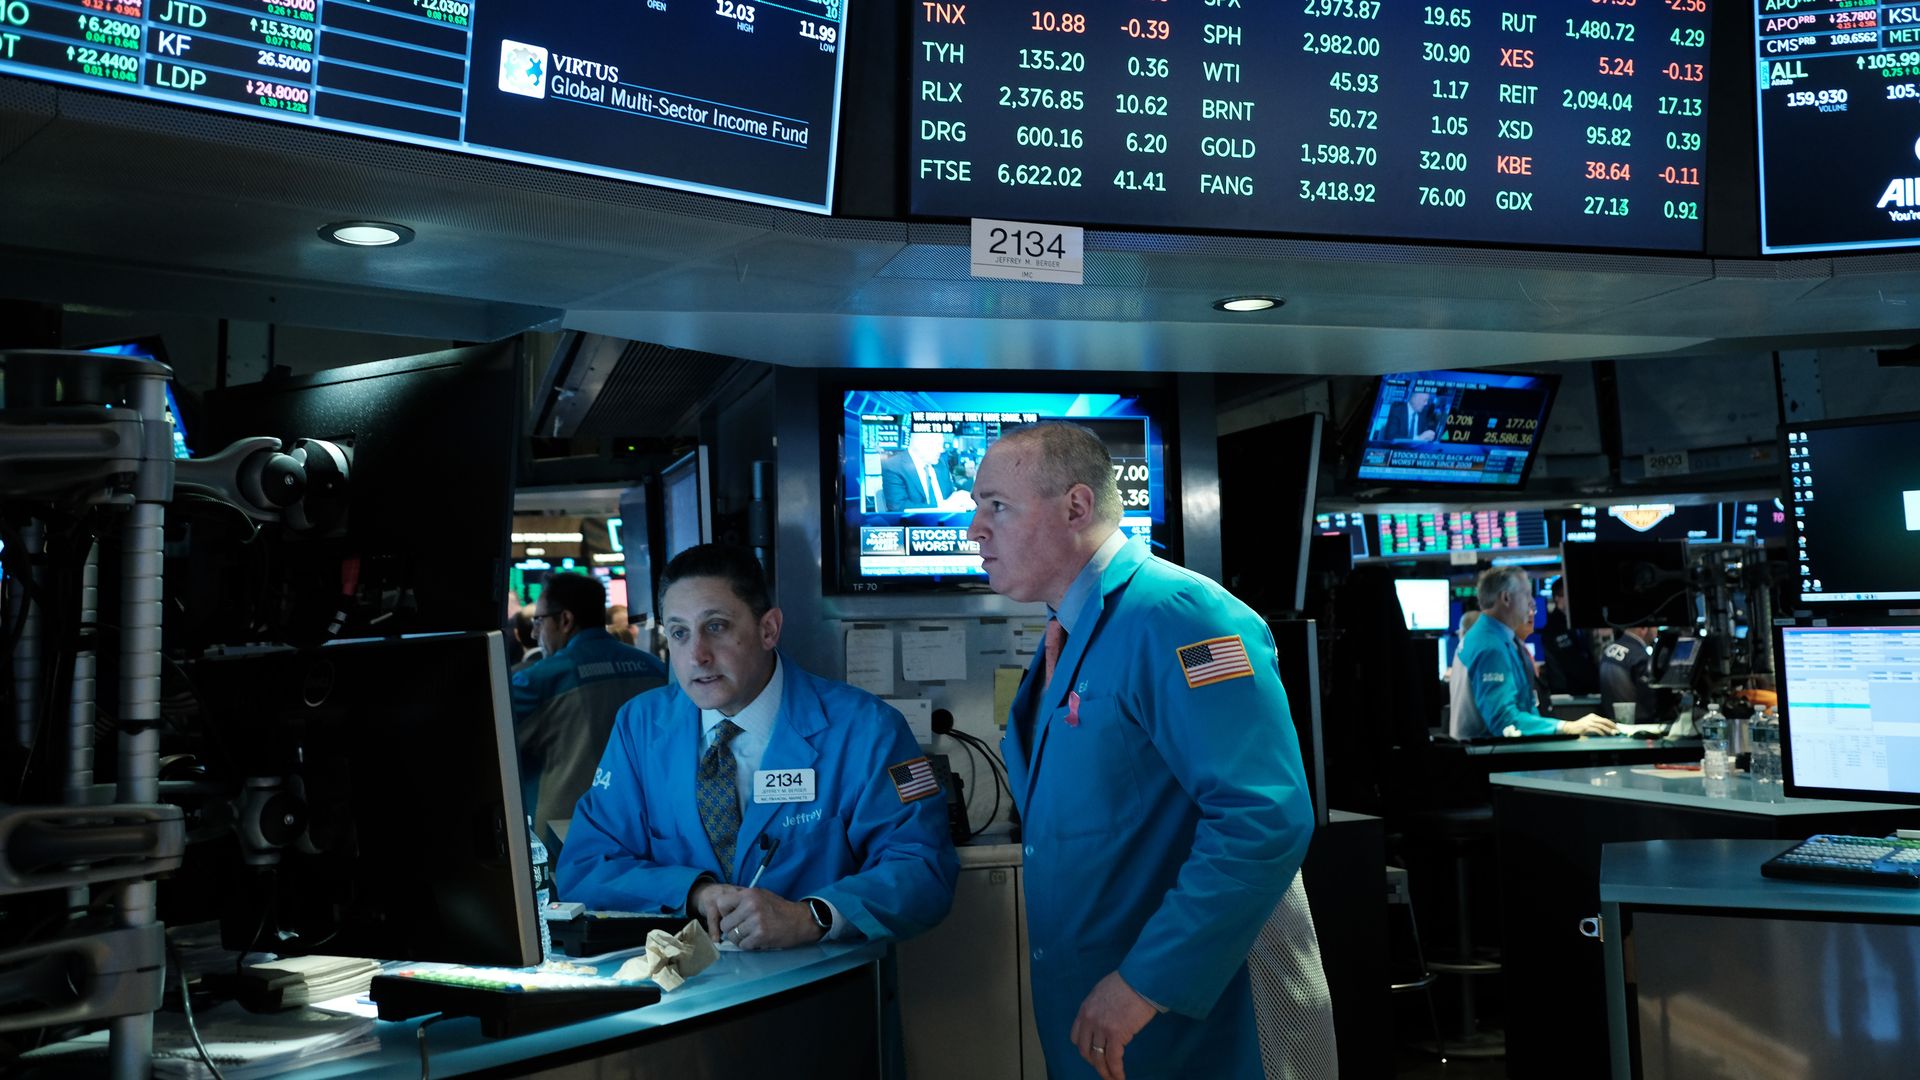 Traders on the NYSE trading floor